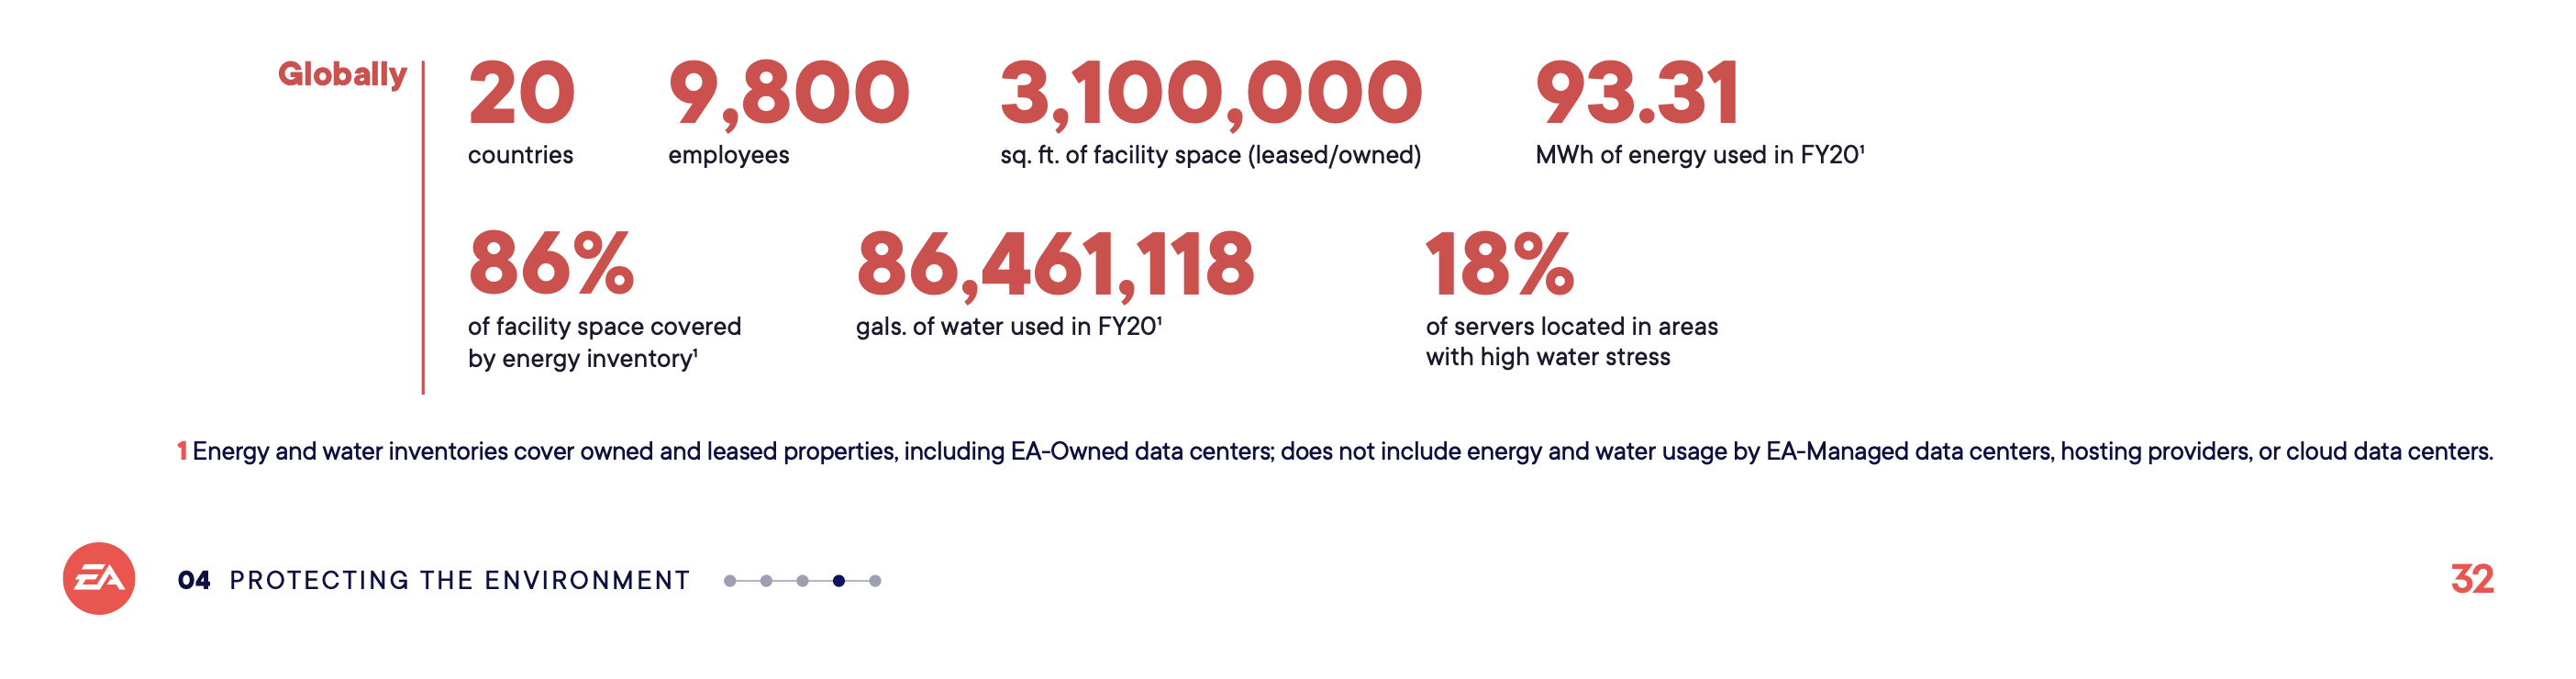 A screenshot of page 32 of the EA 2020 Impact Report showing 93.31 MWh of energy used in FY20'